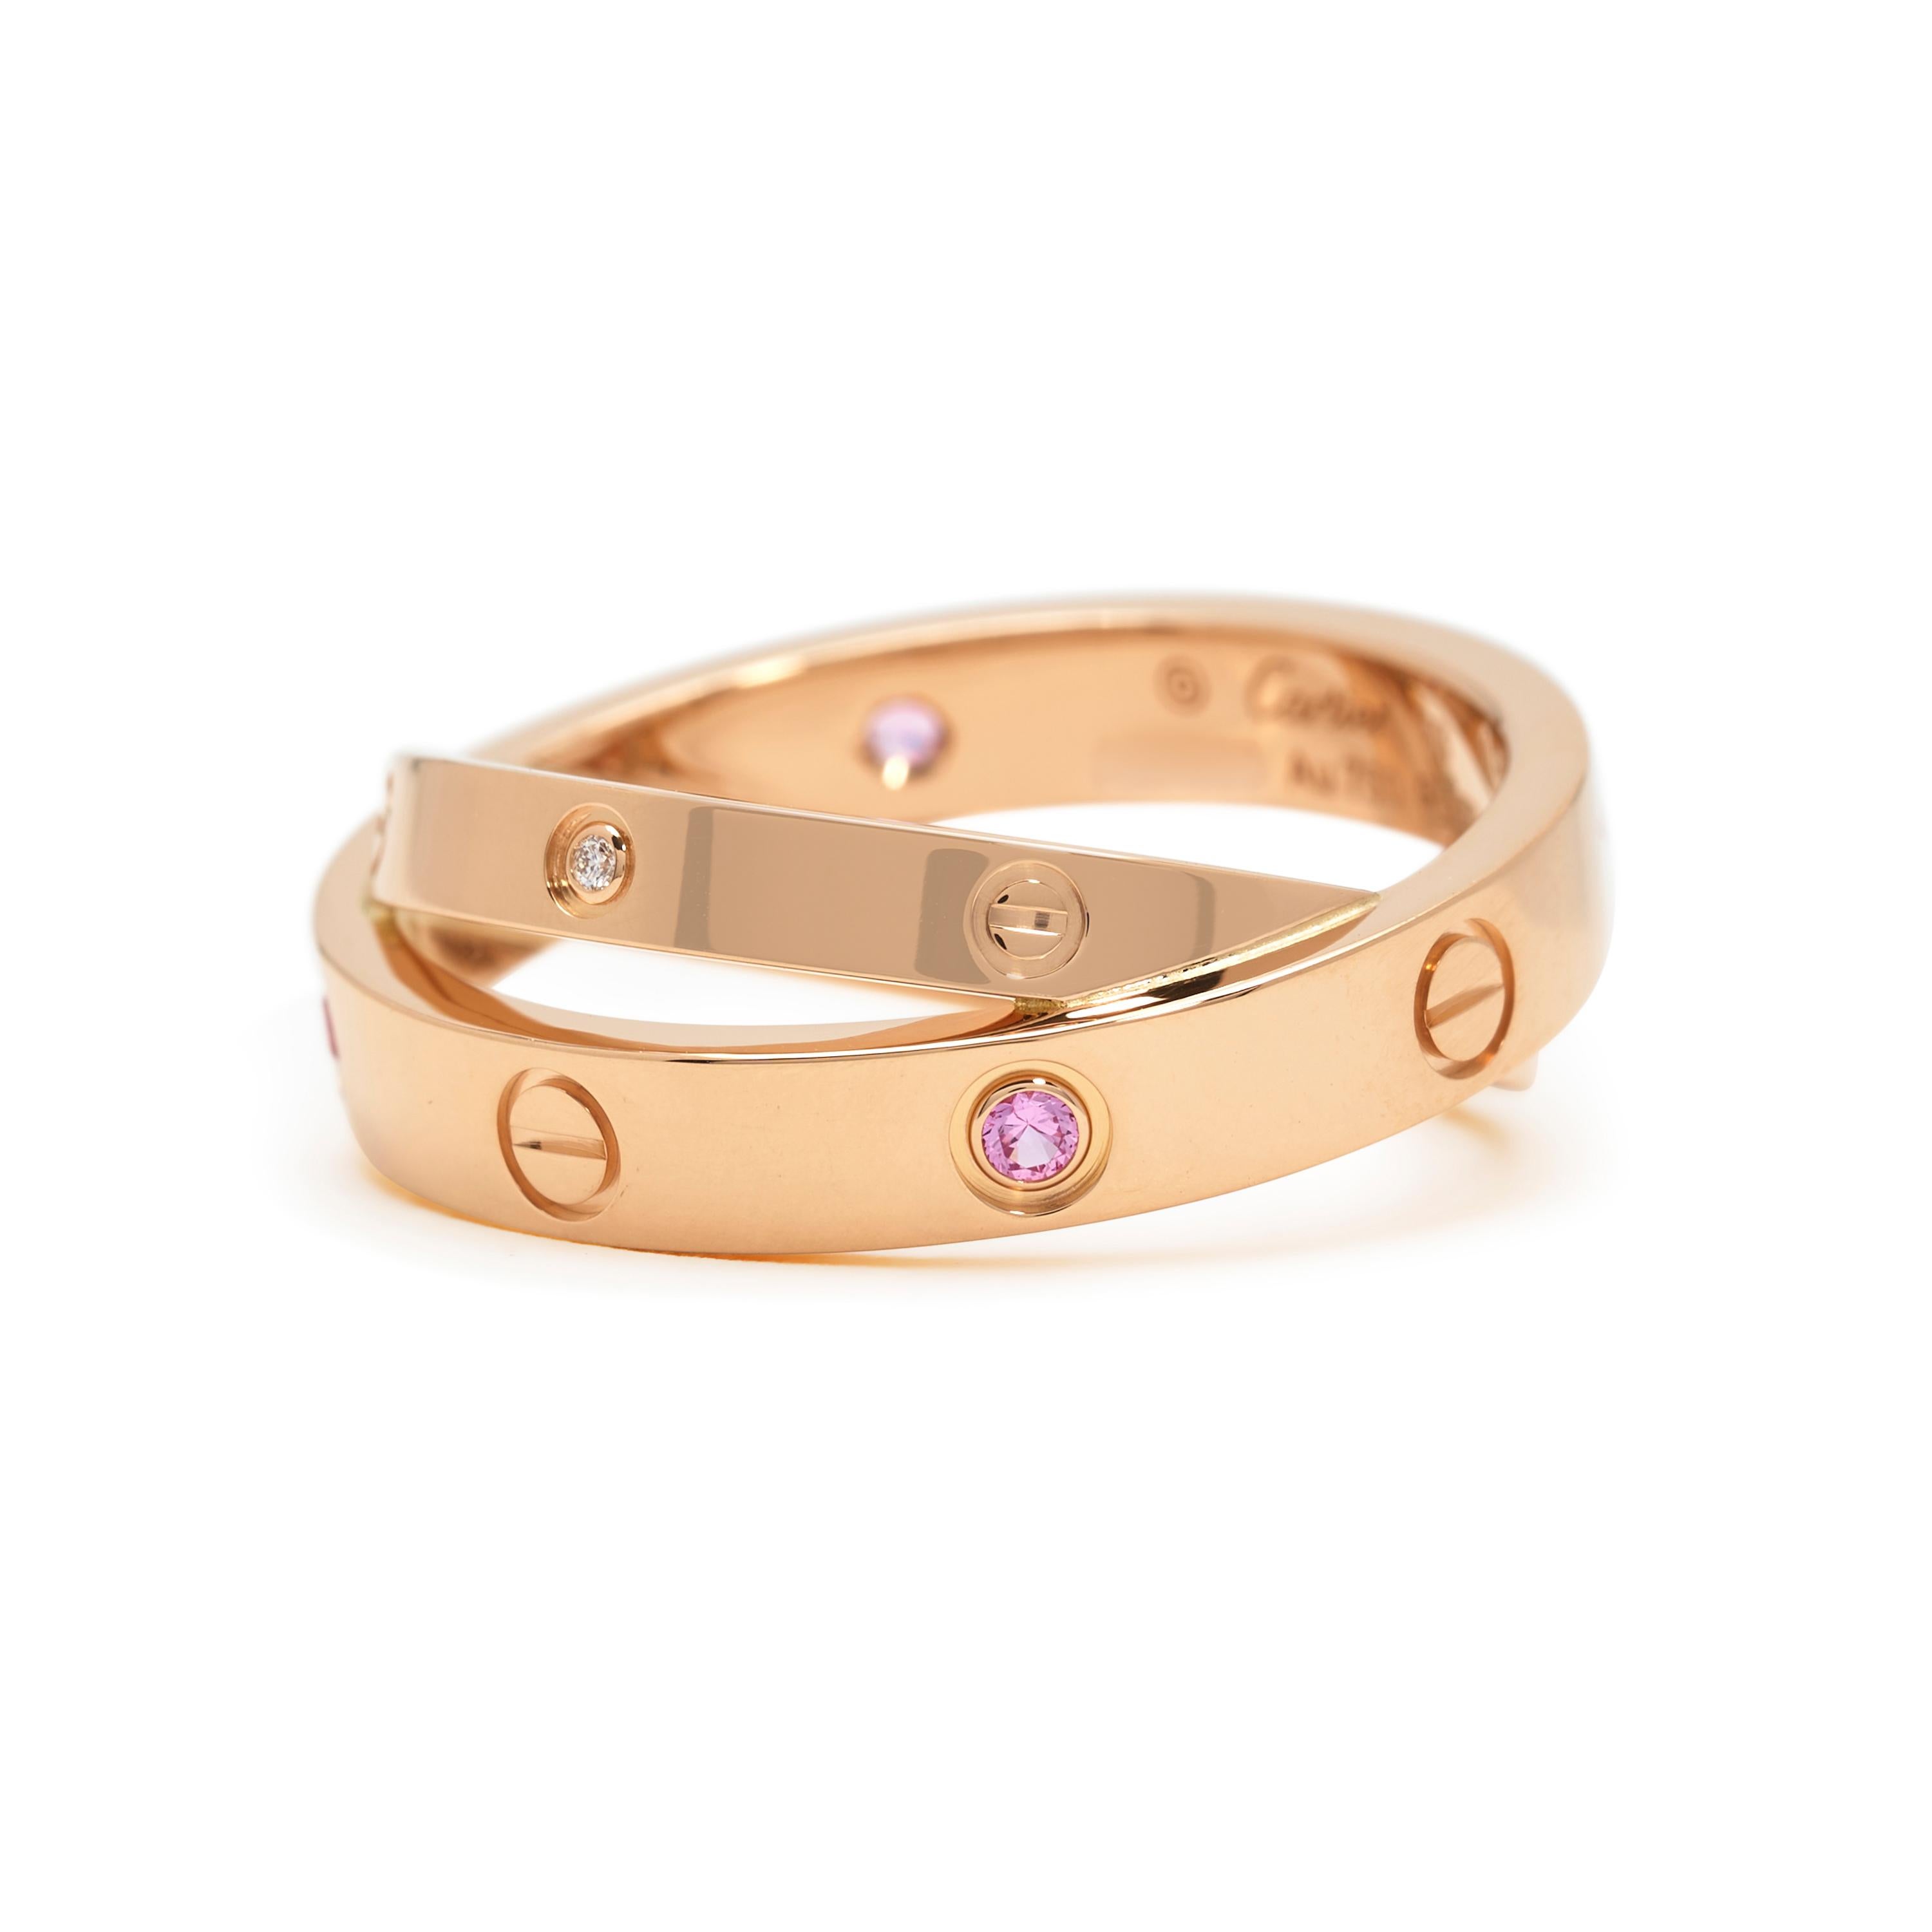 Authentic Cartier Love ring comprised of two bands crafted in 18 karat rose gold.  The wider band is set with four pink sapphires and crosses over a thinner band set with 2 diamonds of an estimated .04 total carats.  Size 53, US 6 1/4.  Signed